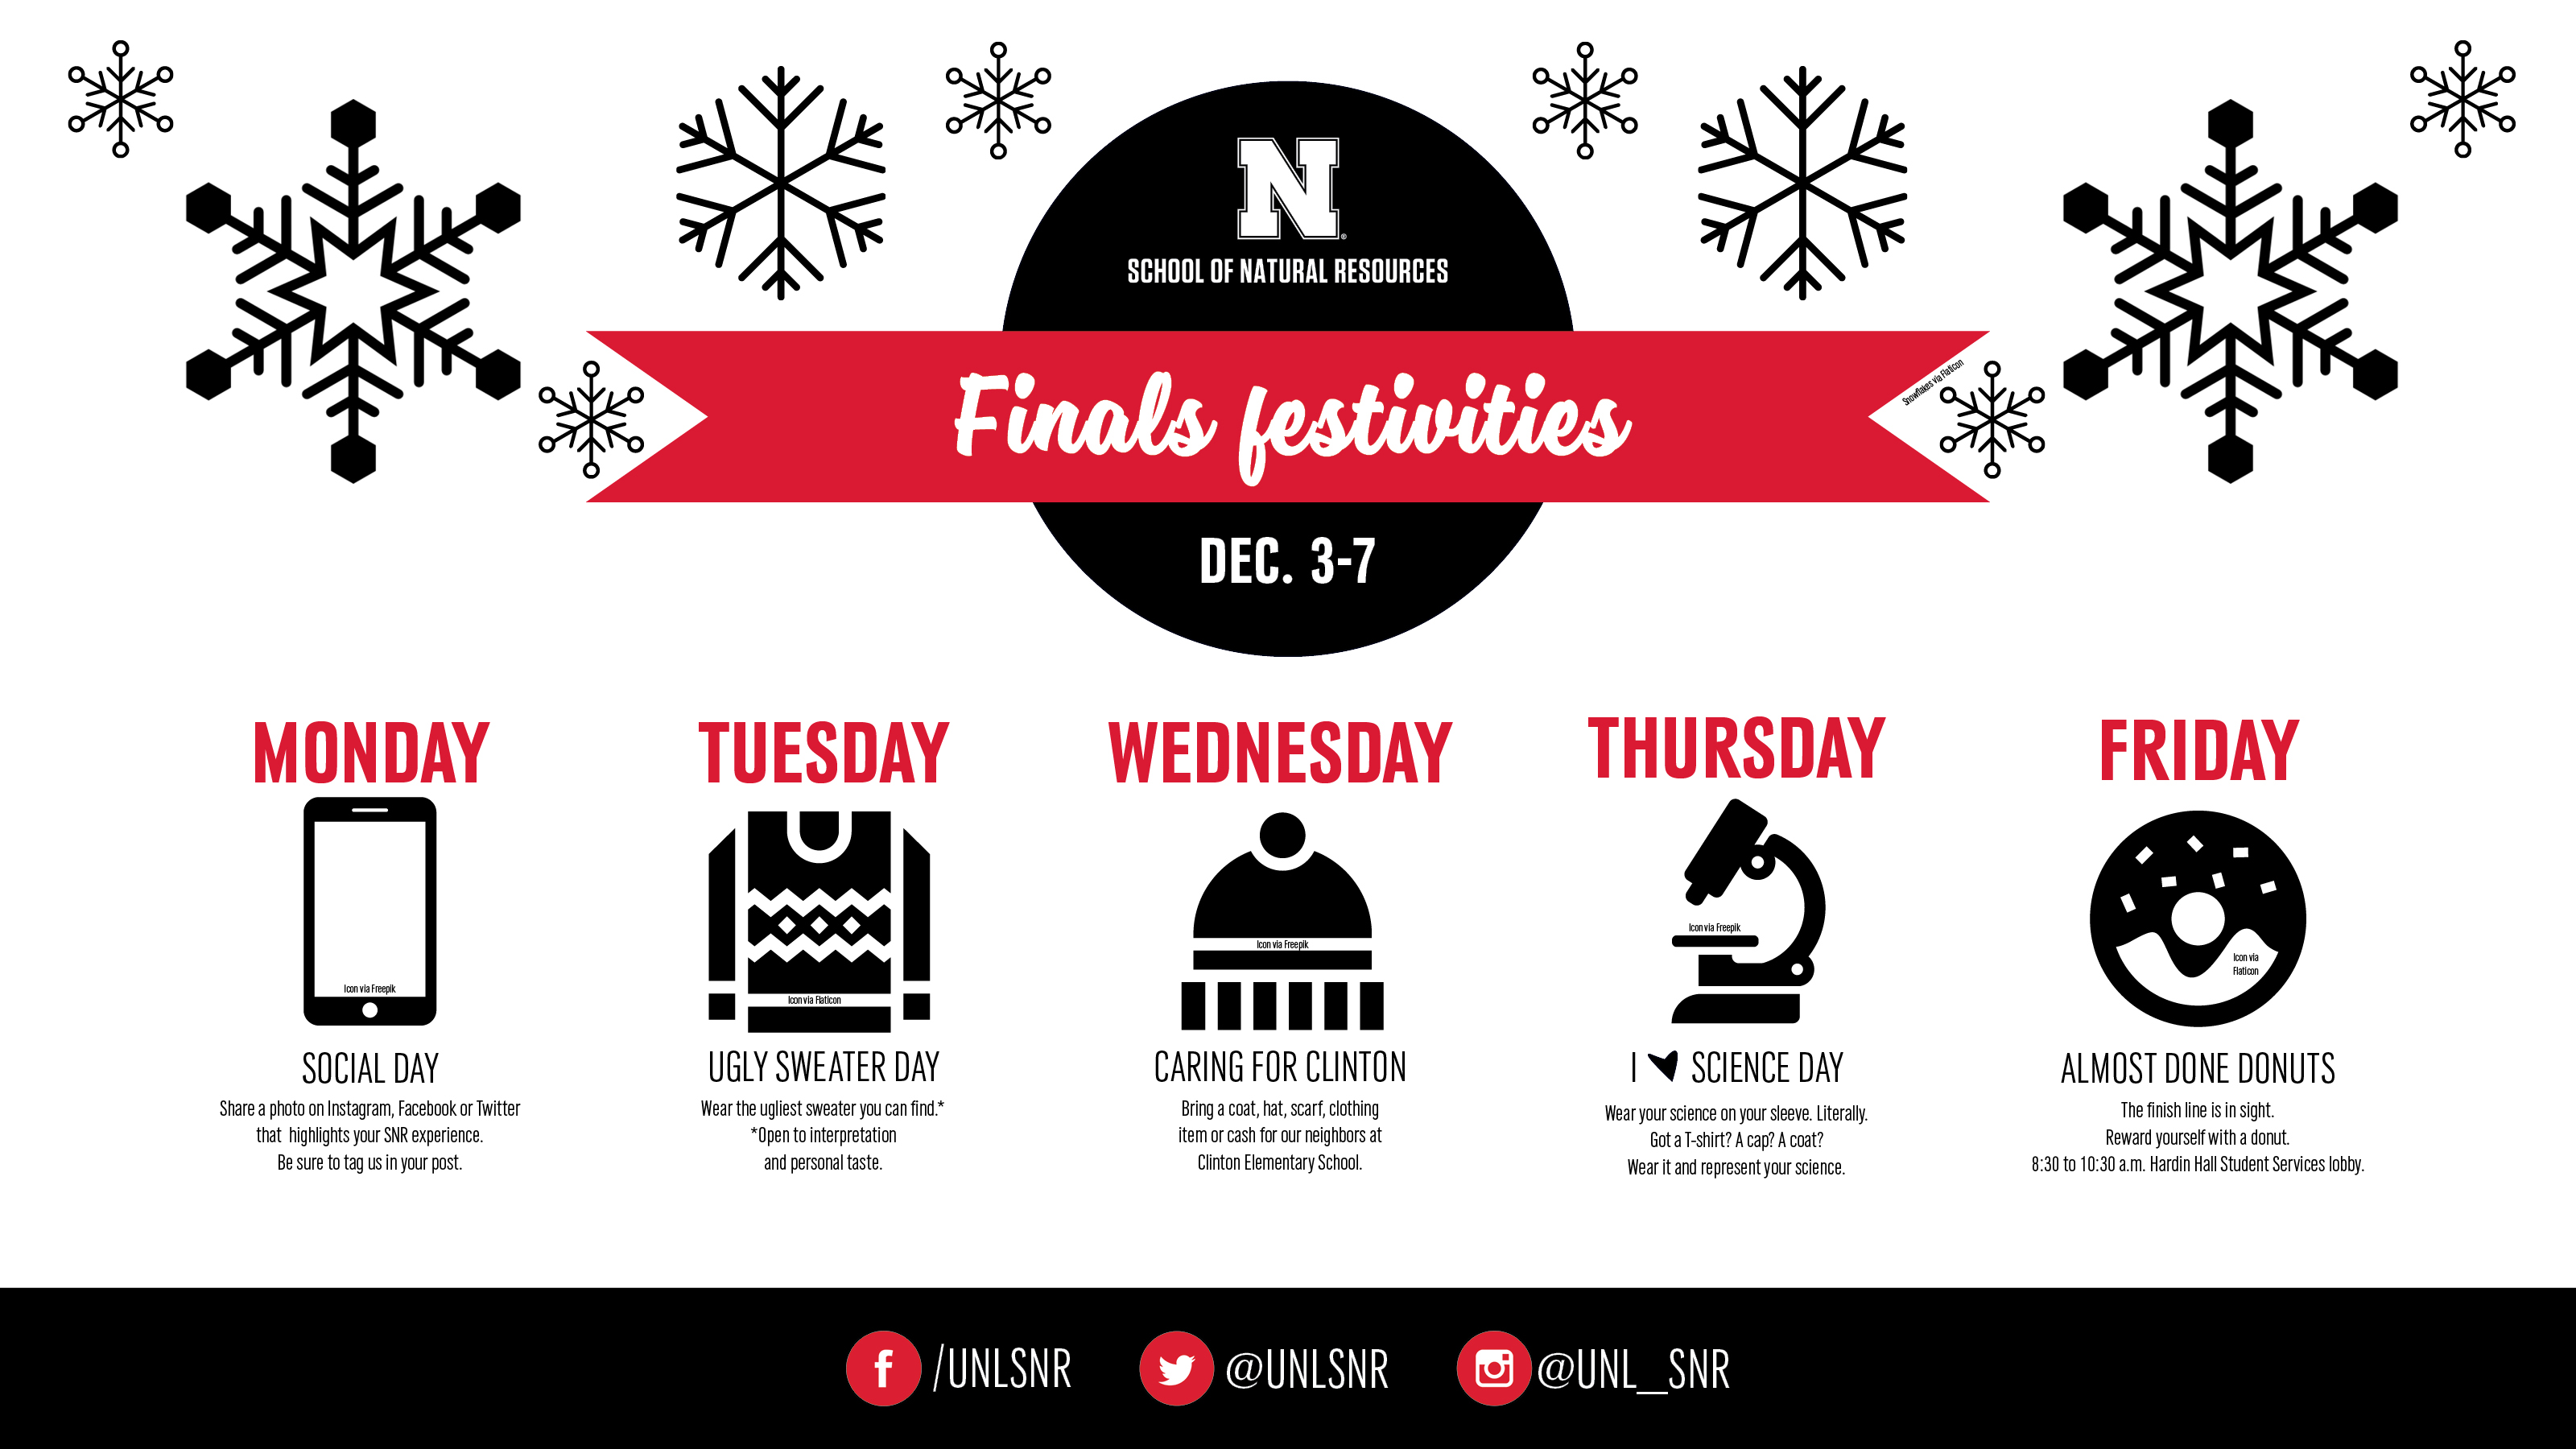 Join SNR in celebrating the near end of the semester.